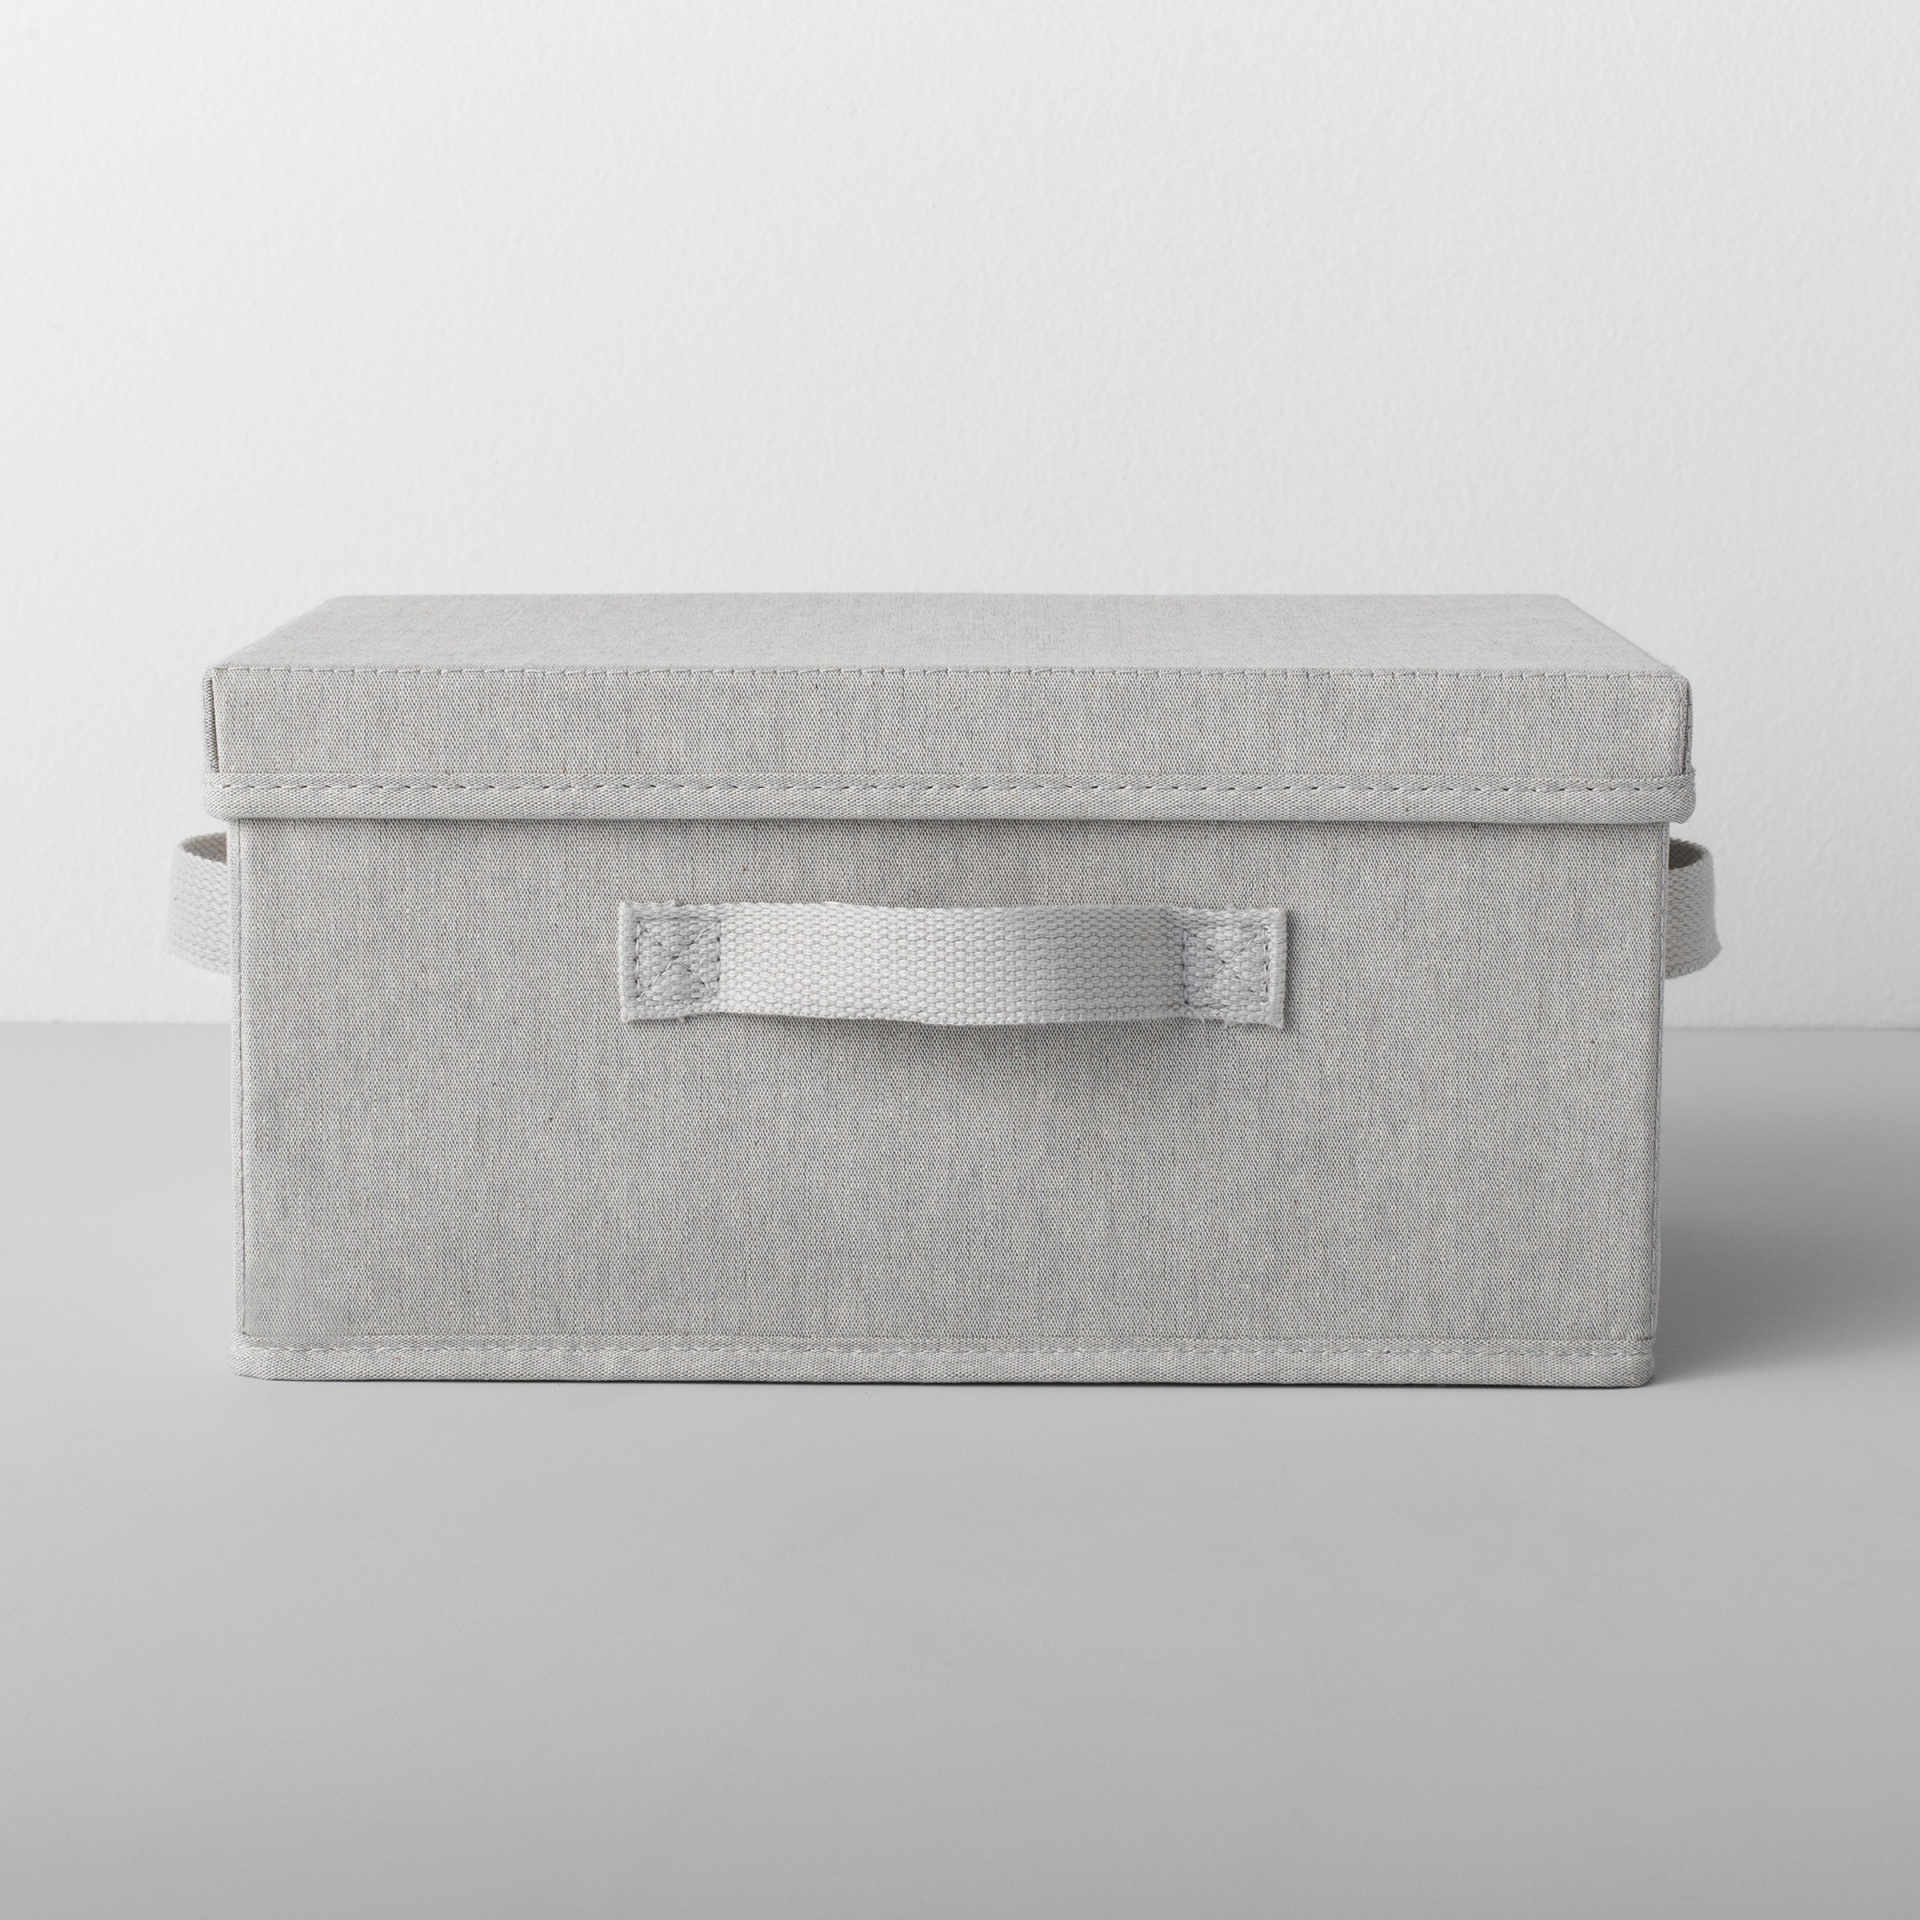 New Fabric Storage Bin Standard Shoe From Target Made by Design 